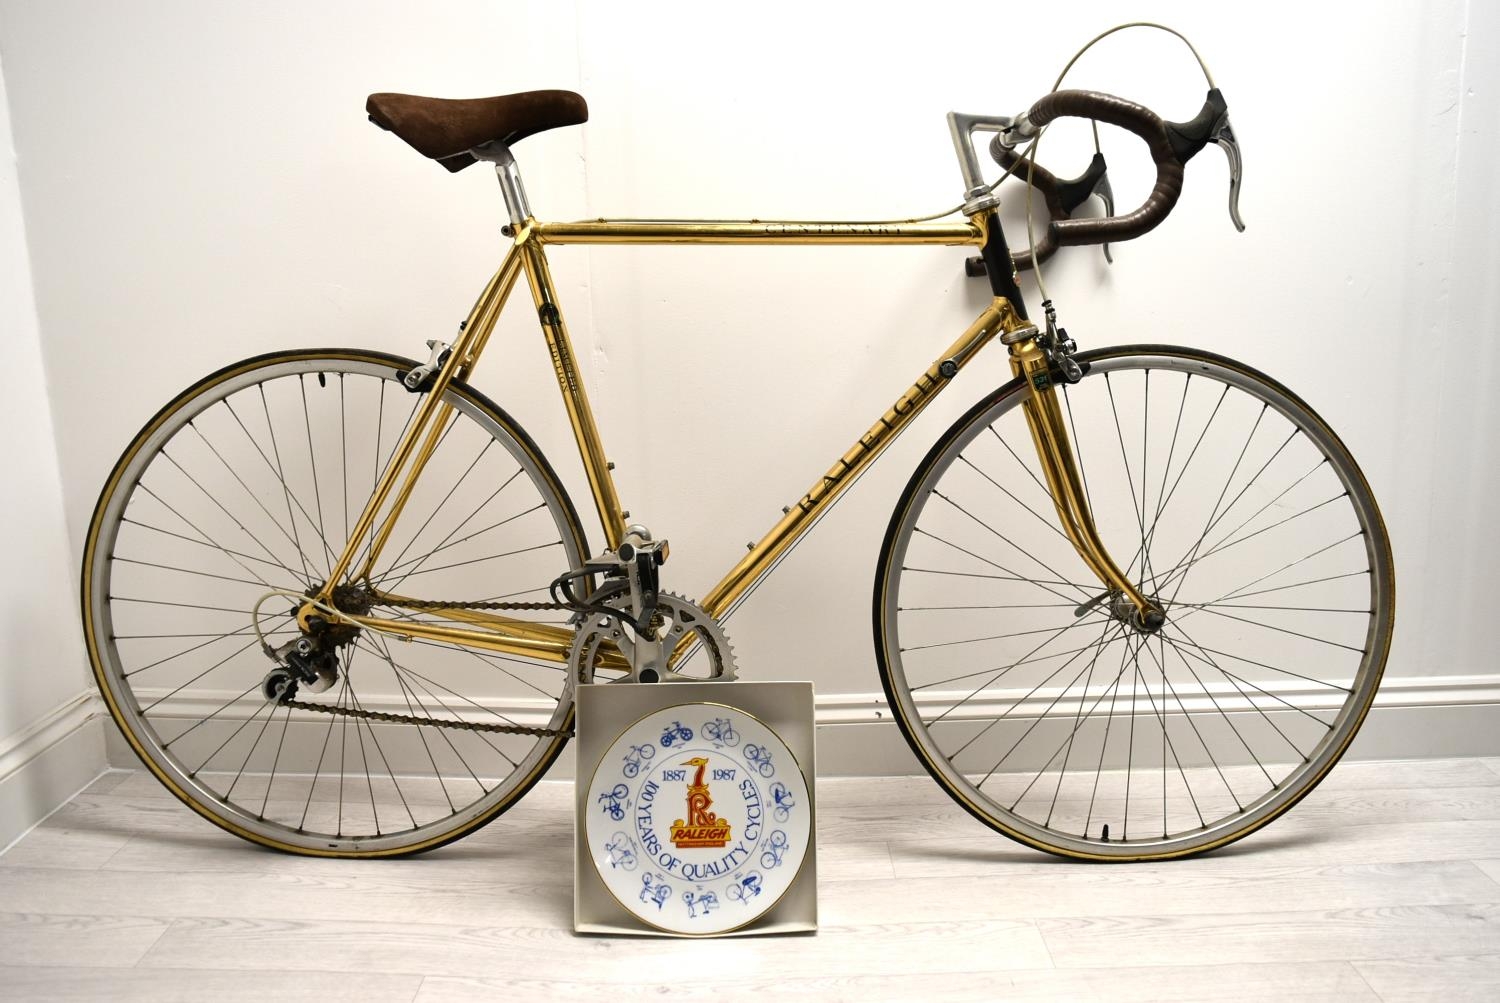 Raleigh Centenary 24k gold plated bicycle, 23" frame. Wheels Dia.26". 100 in total were made for